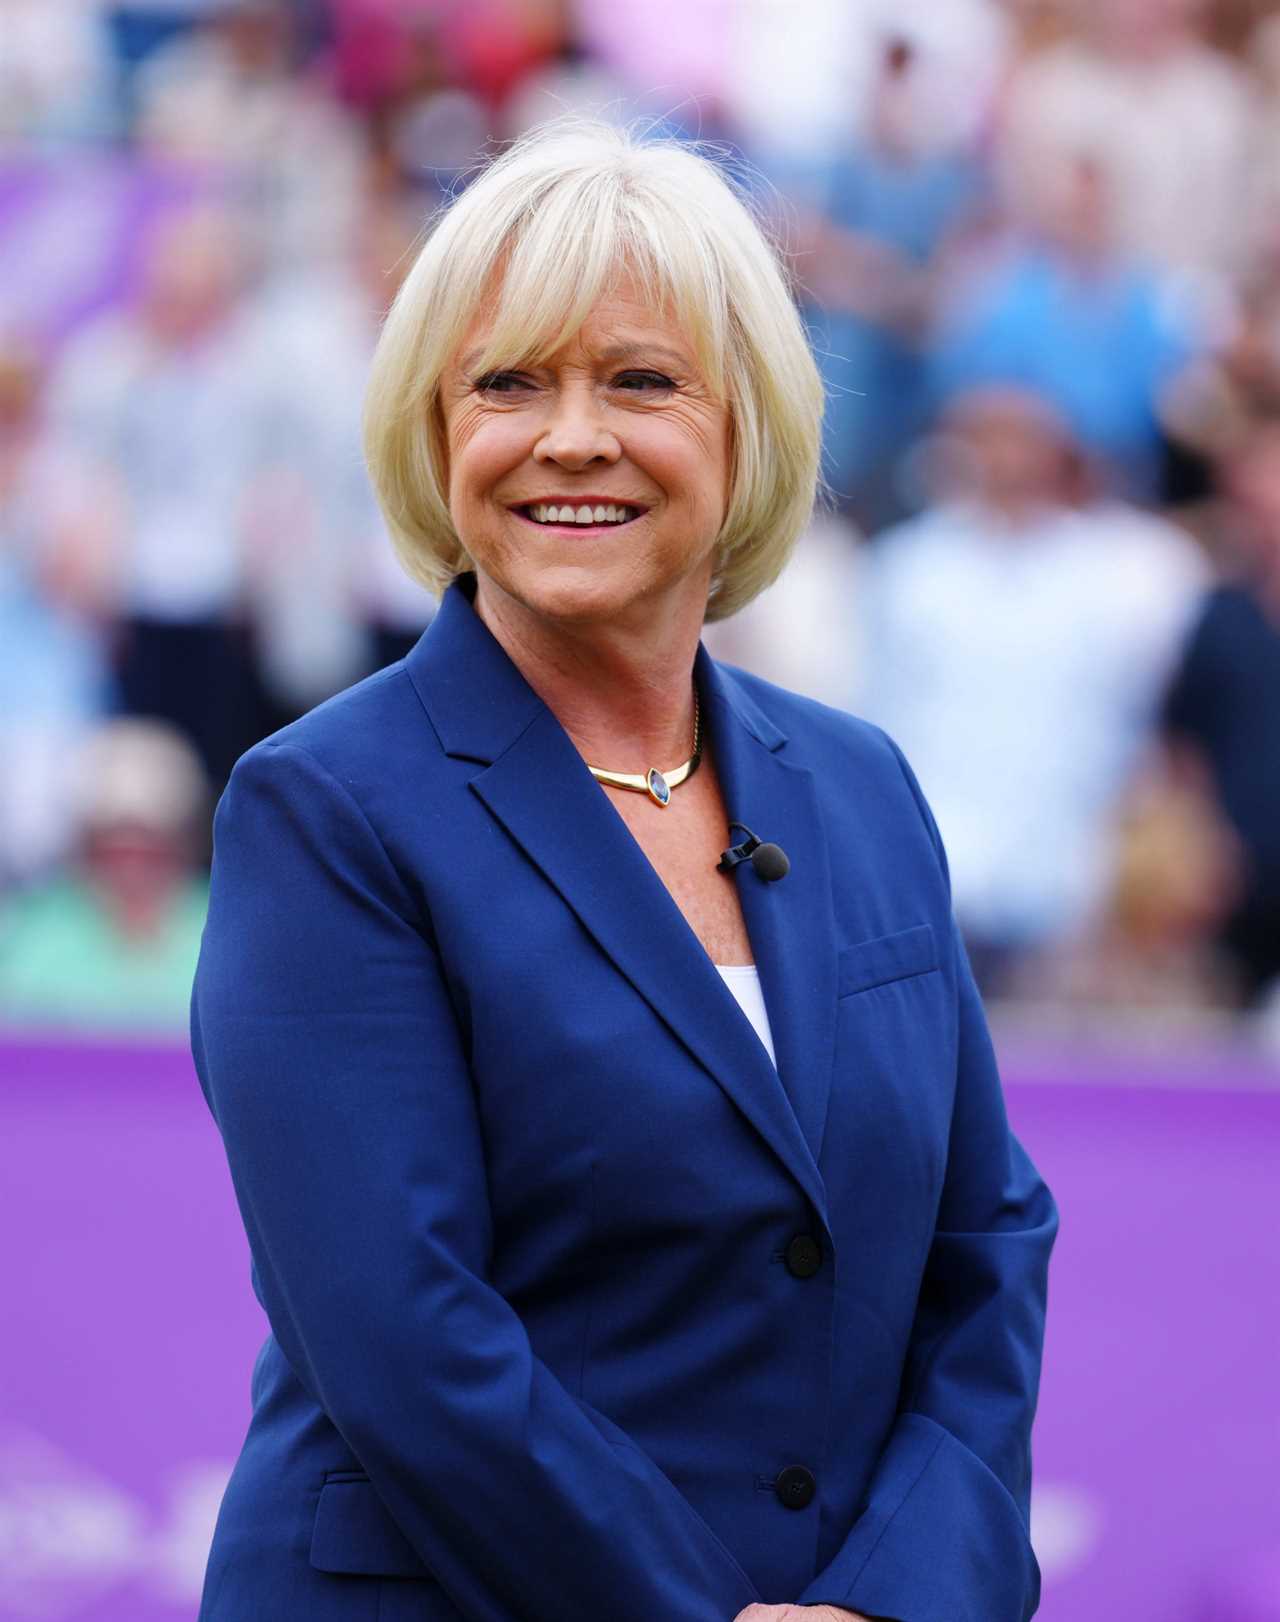 Lionesses, the Queen and Dame Deborah James named the most inspirational stars in Fabulous’ 2022 Women of the Year list